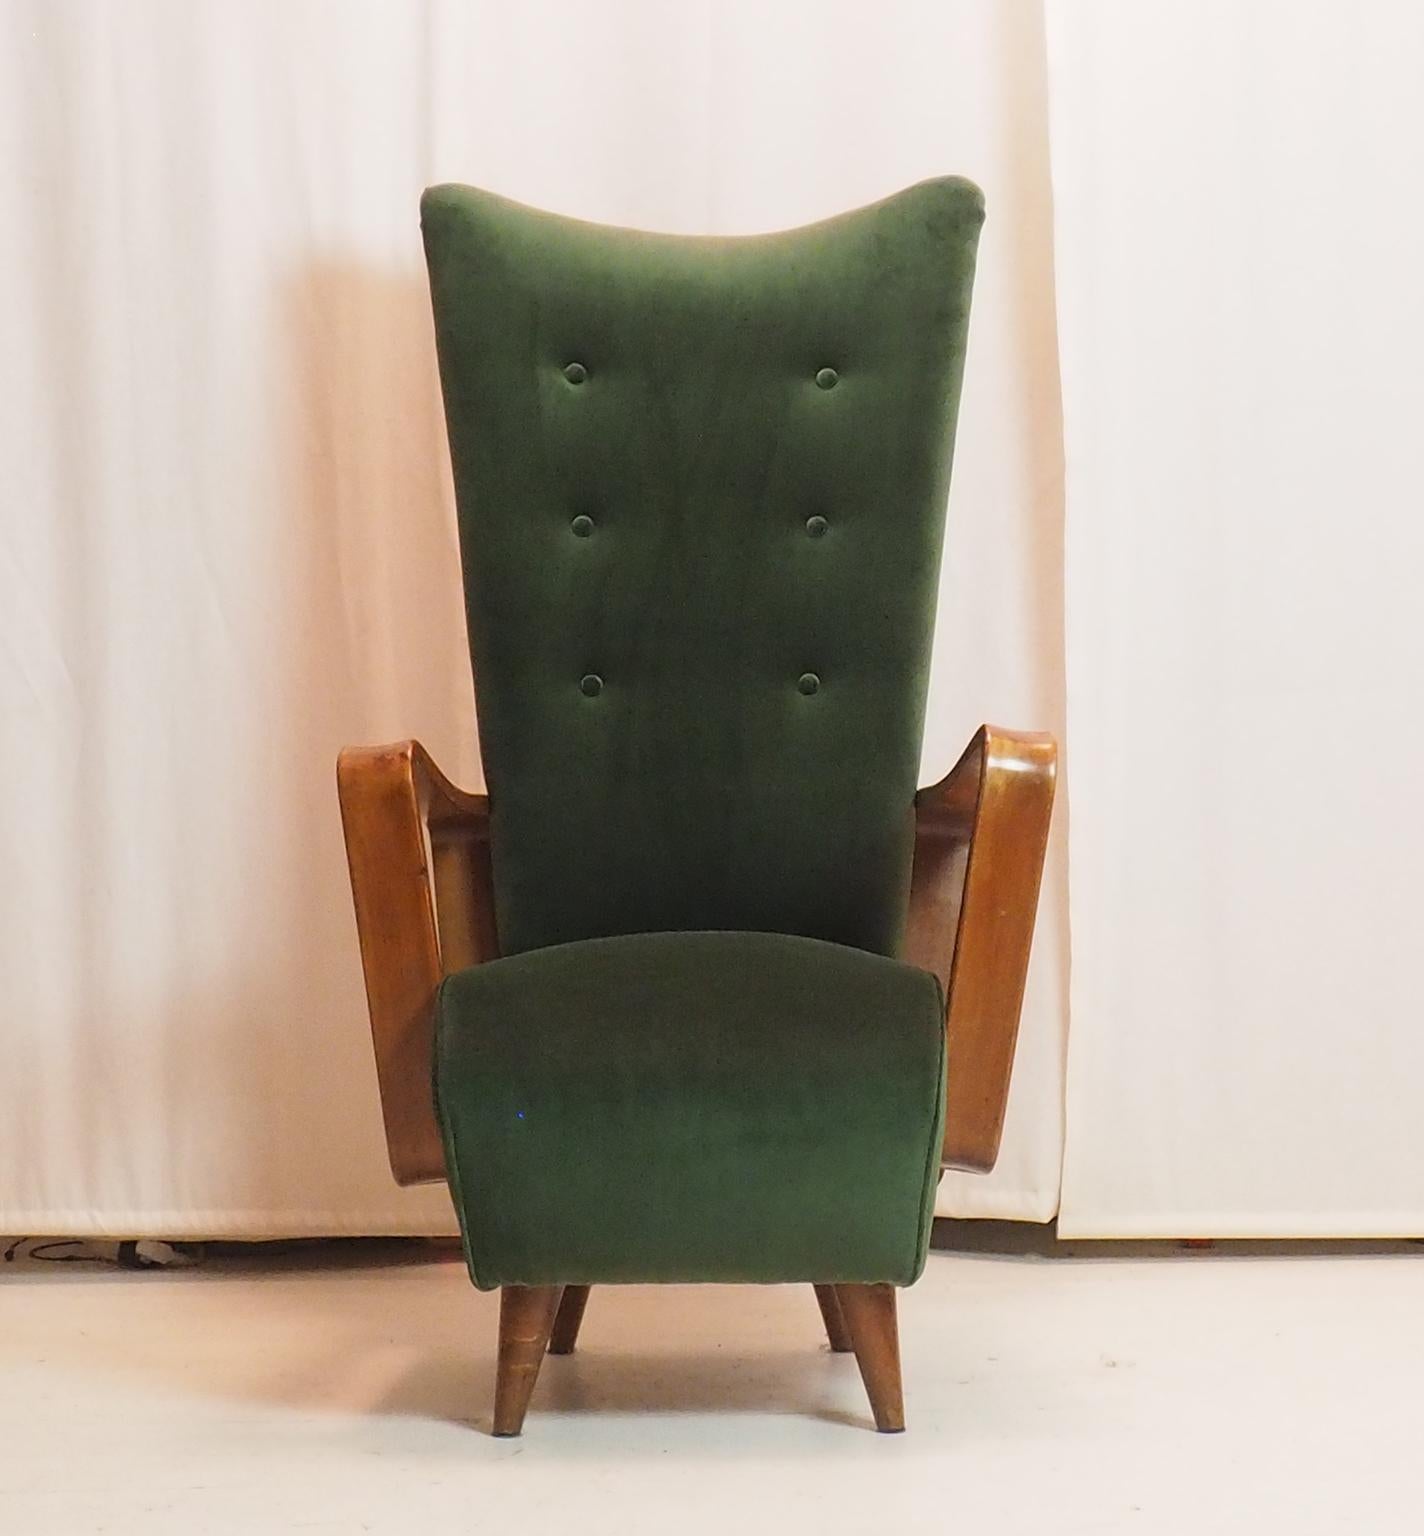 Midcentury High Back Italian Green Armchairs by Pietro Lingeri, Italy 1950s For Sale 5